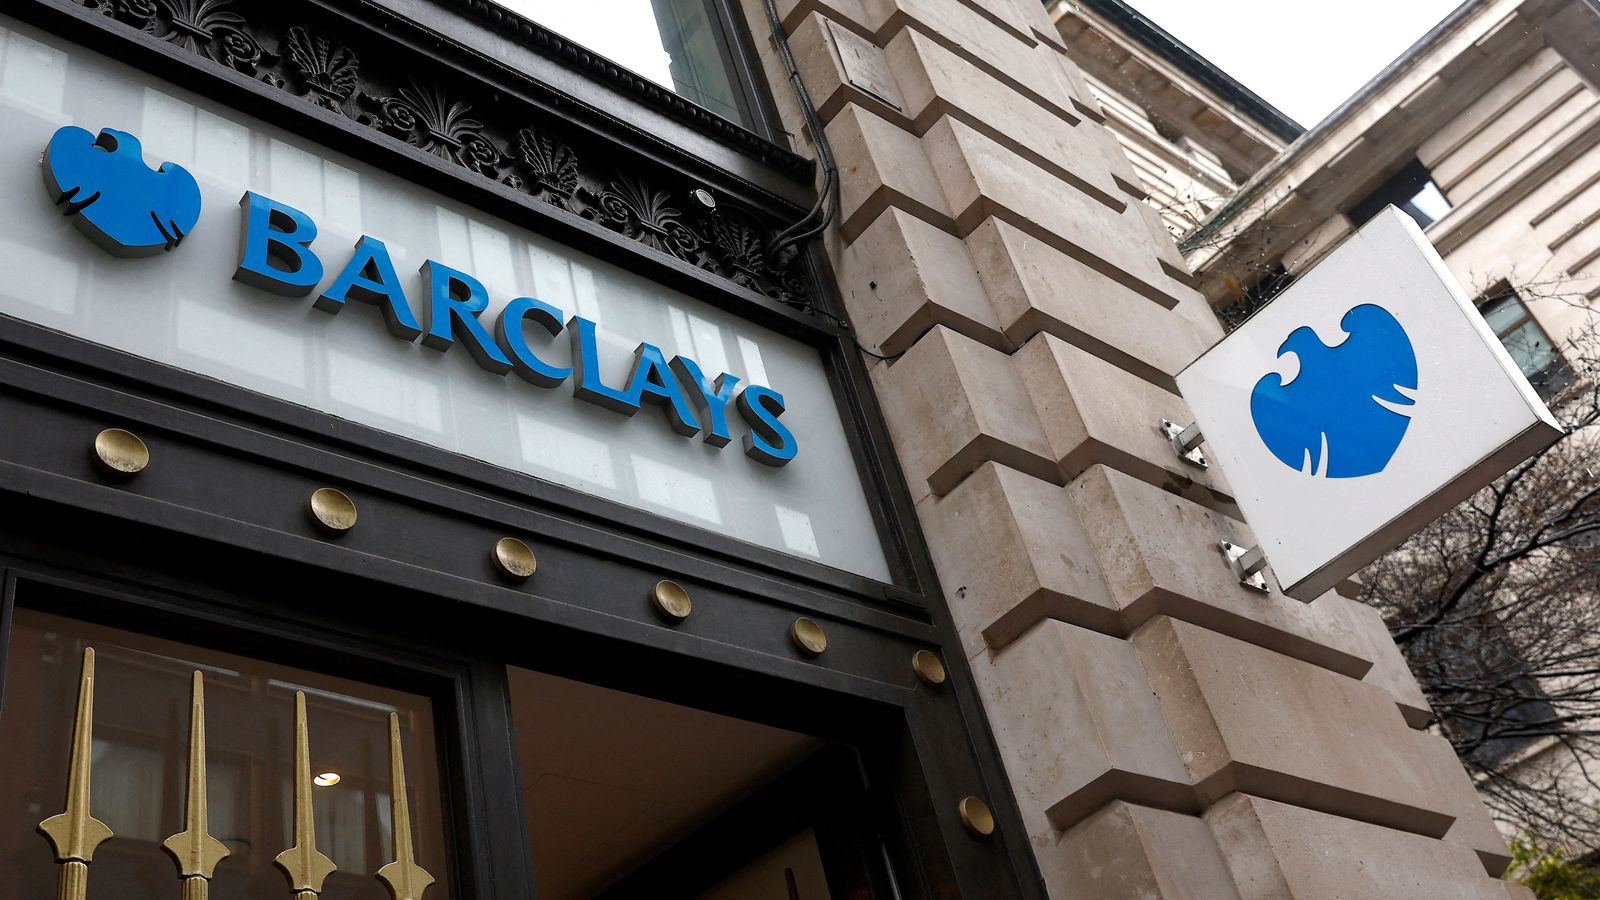 Barclays reveals revival plan to woo investors as profits fall | Business News